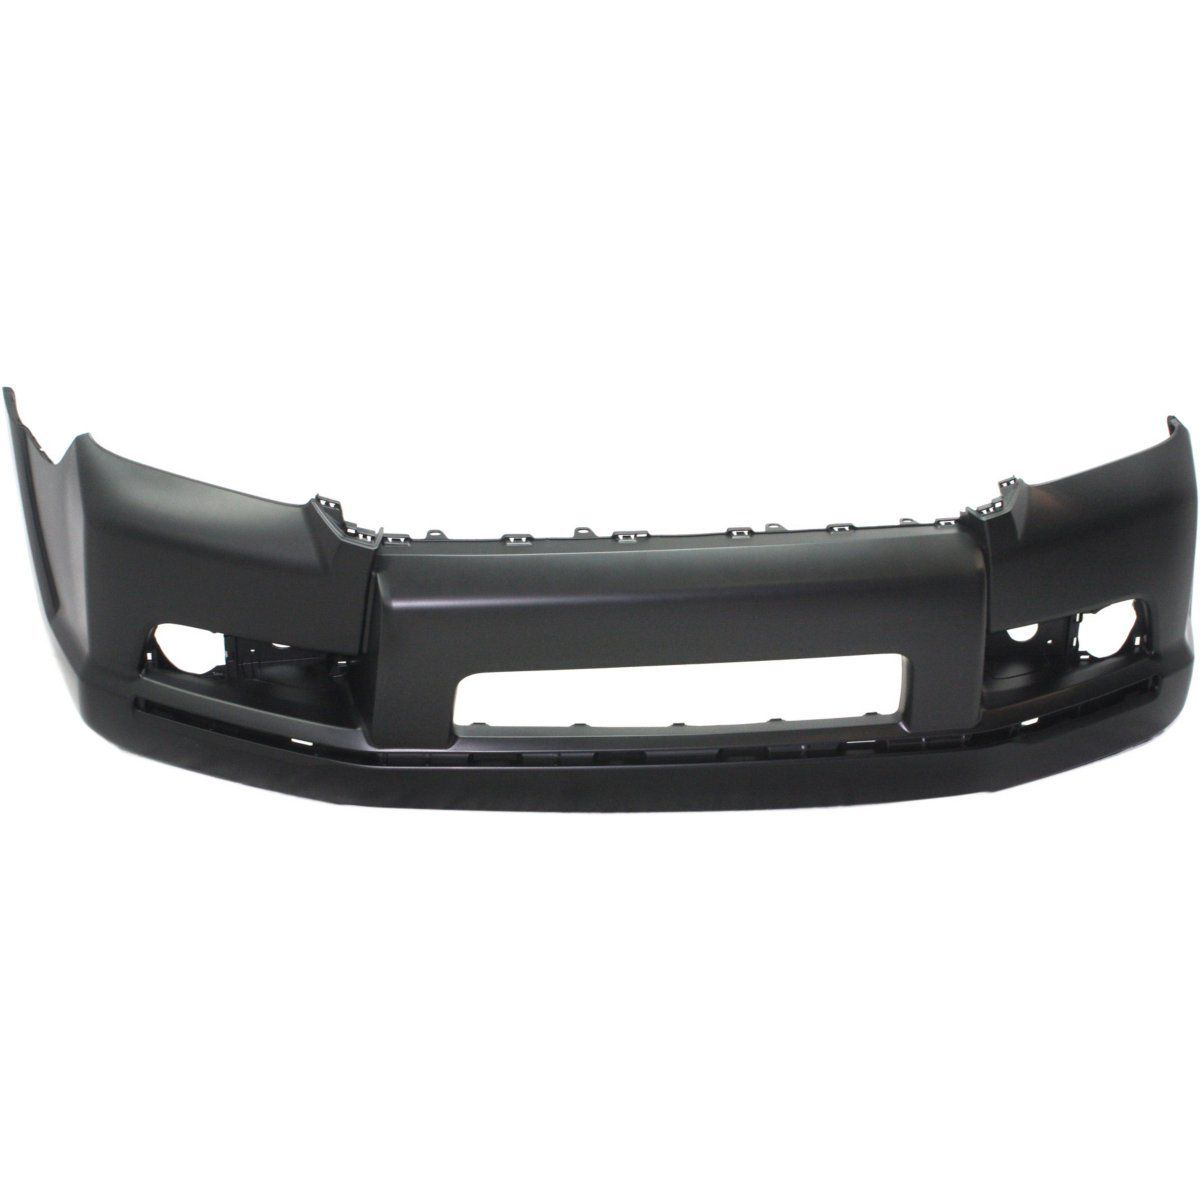 2010-2013 TOYOTA 4RUNNER Front Bumper Cover w/Chrome Trim  From 1-10 Painted to Match